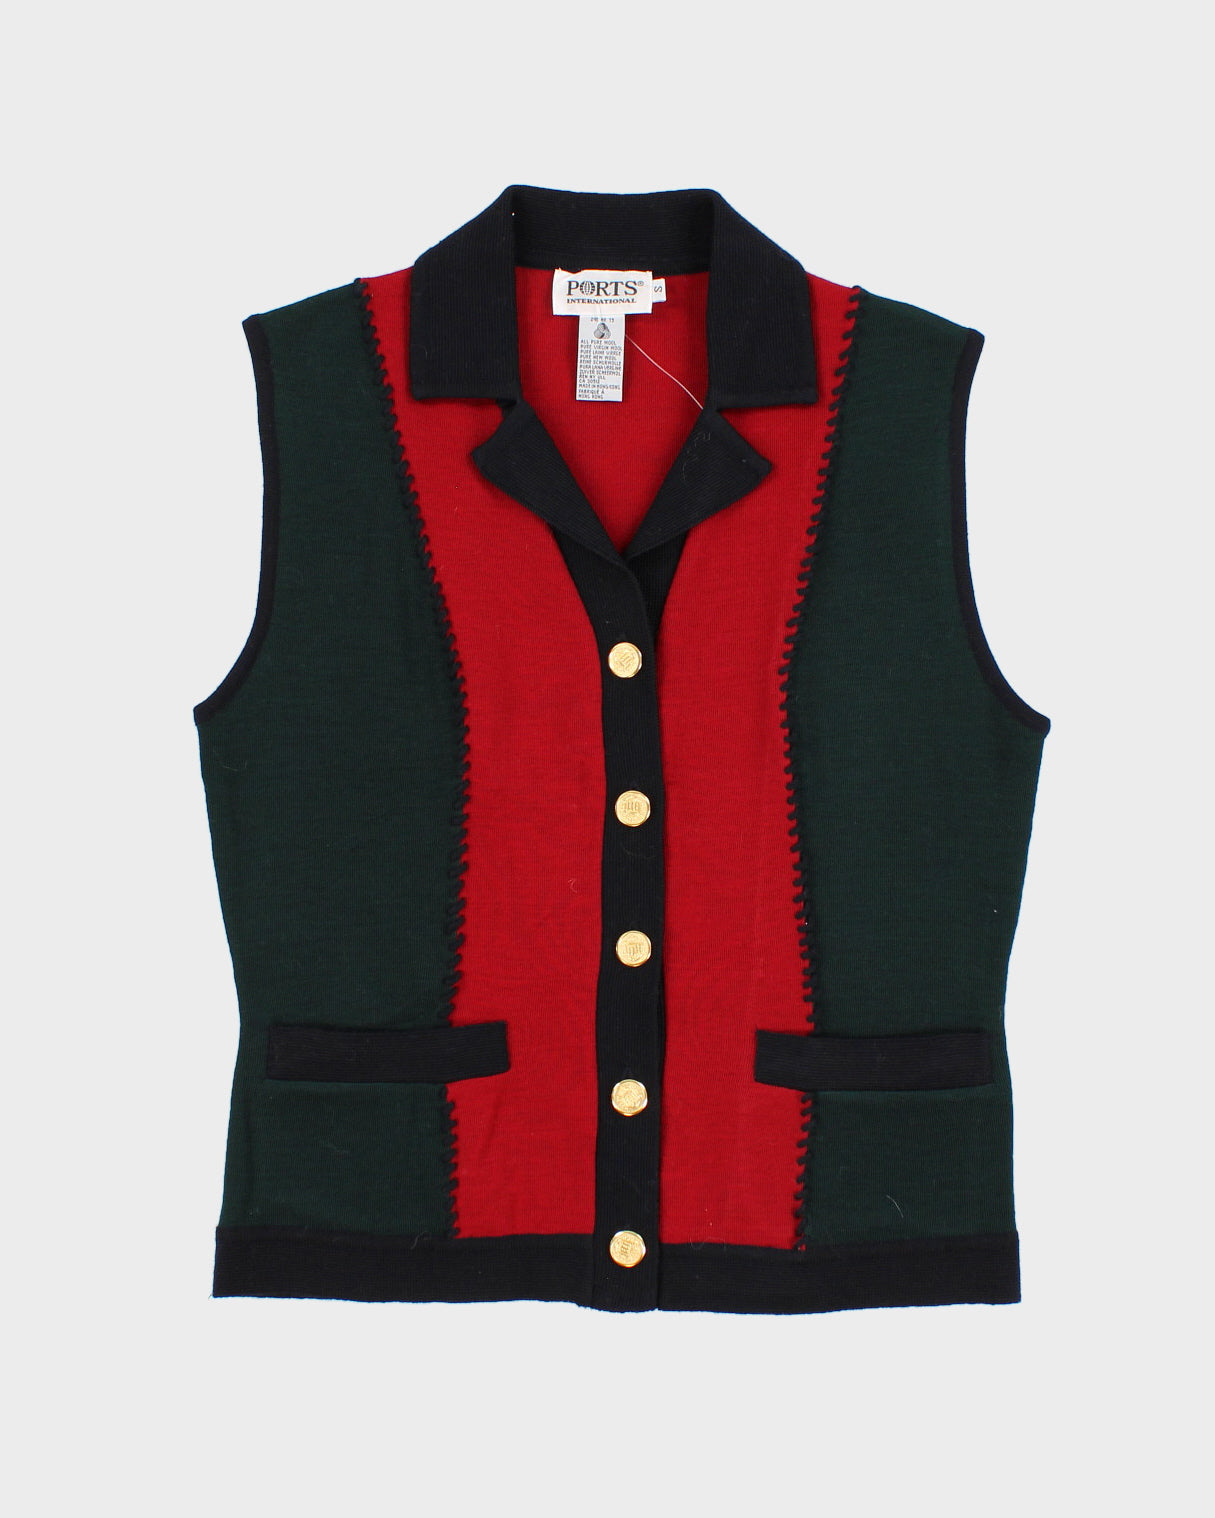 Womens Green and Red Pure Wool Vest Top - S